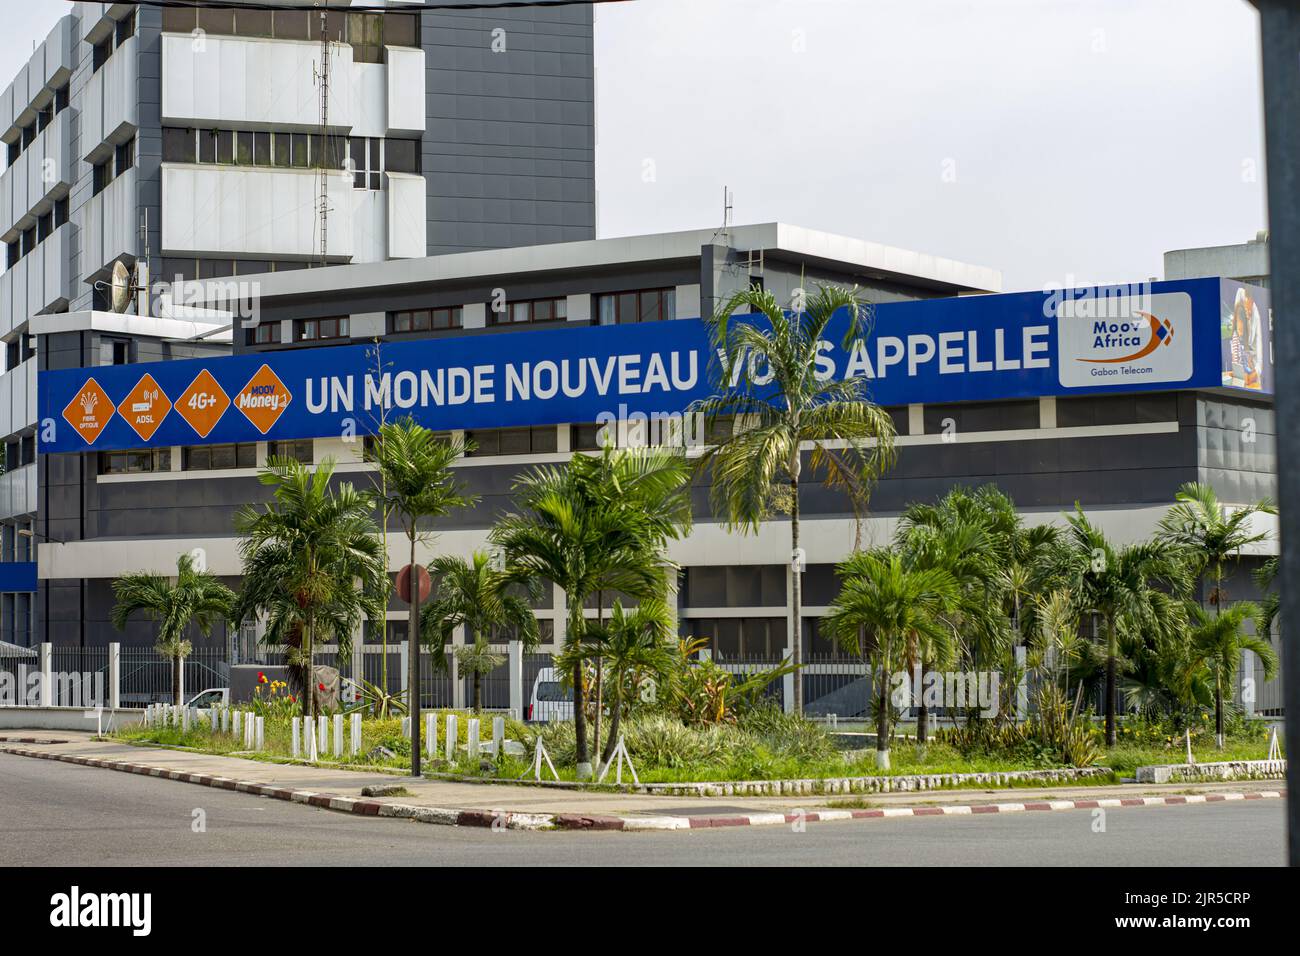 Flower garden in the city, a means to fight against global warming in Libreville on January 10, 2022 Stock Photo